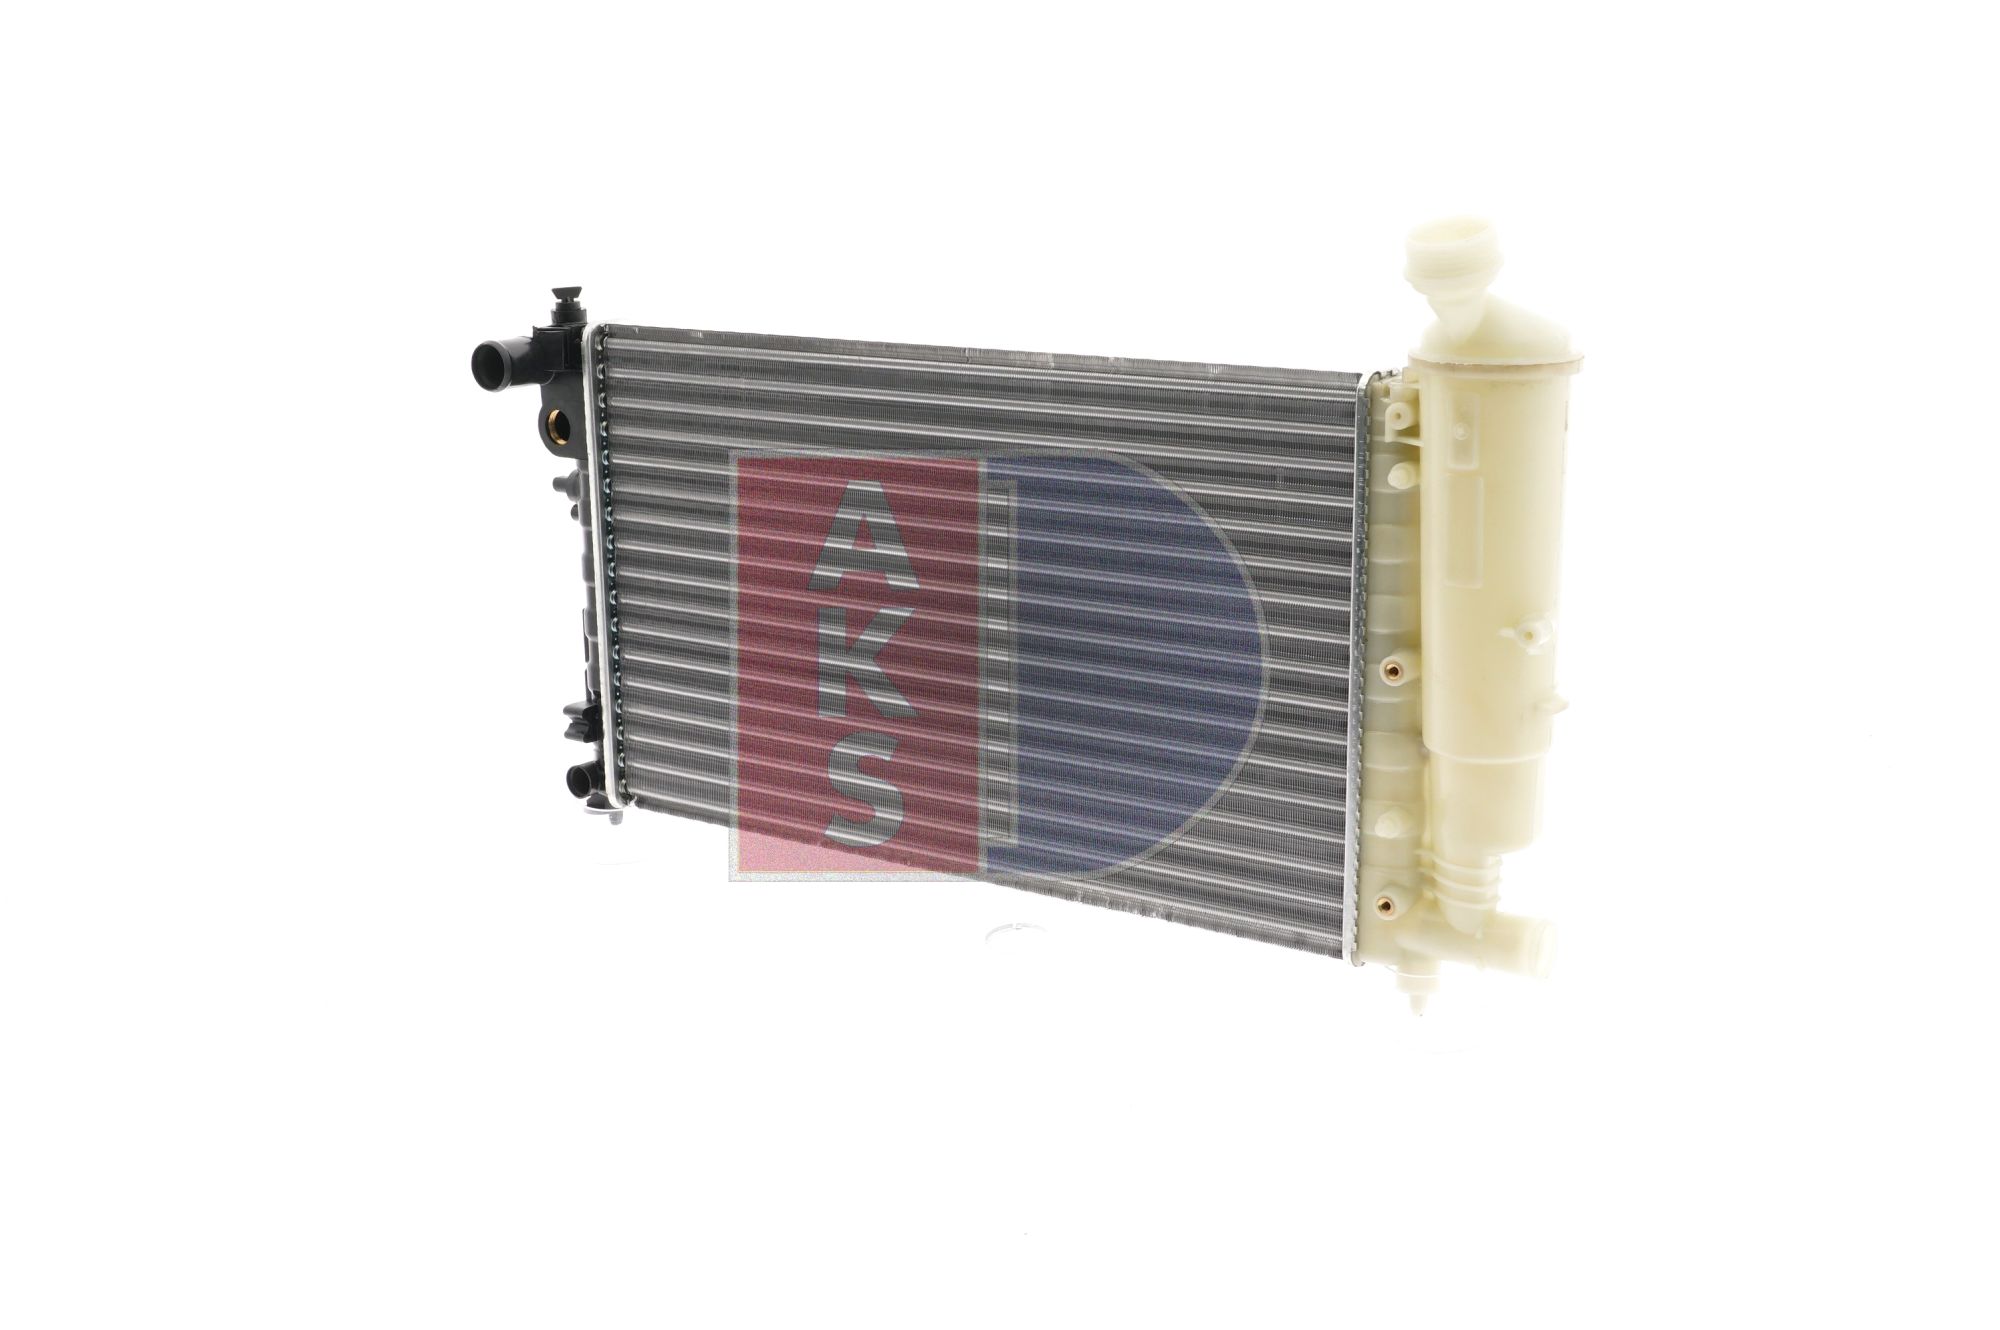 AKS DASIS 160007N Engine radiator 530 x 322 x 24 mm, Mechanically jointed cooling fins